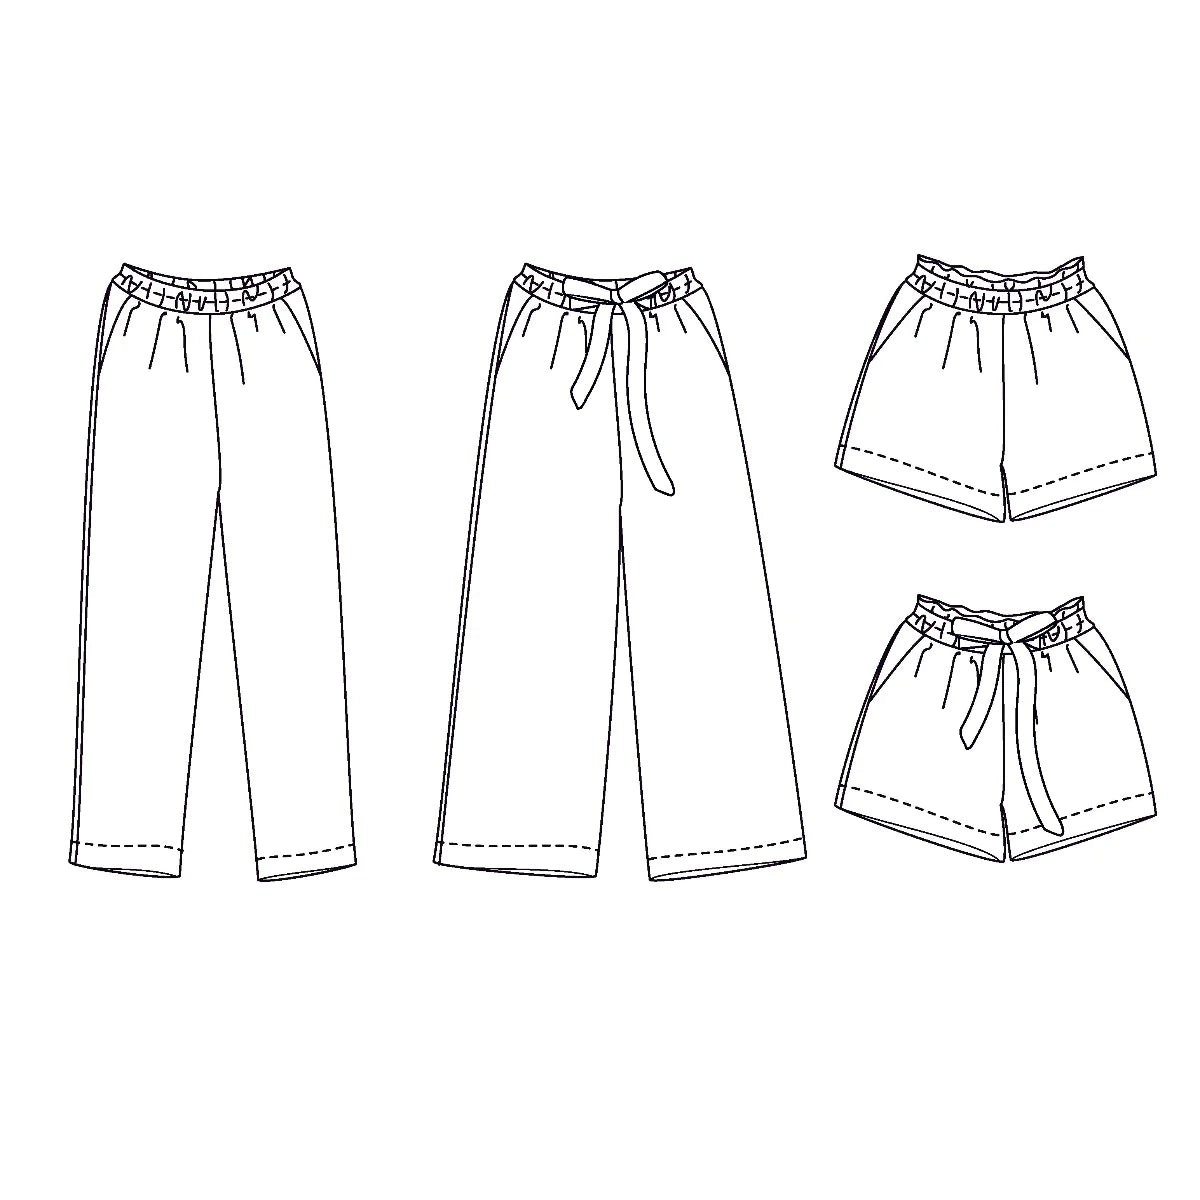 Ikatee - SINGAPOUR Adult Trousers and Shorts - 32/52 - Paper Sewing Pattern